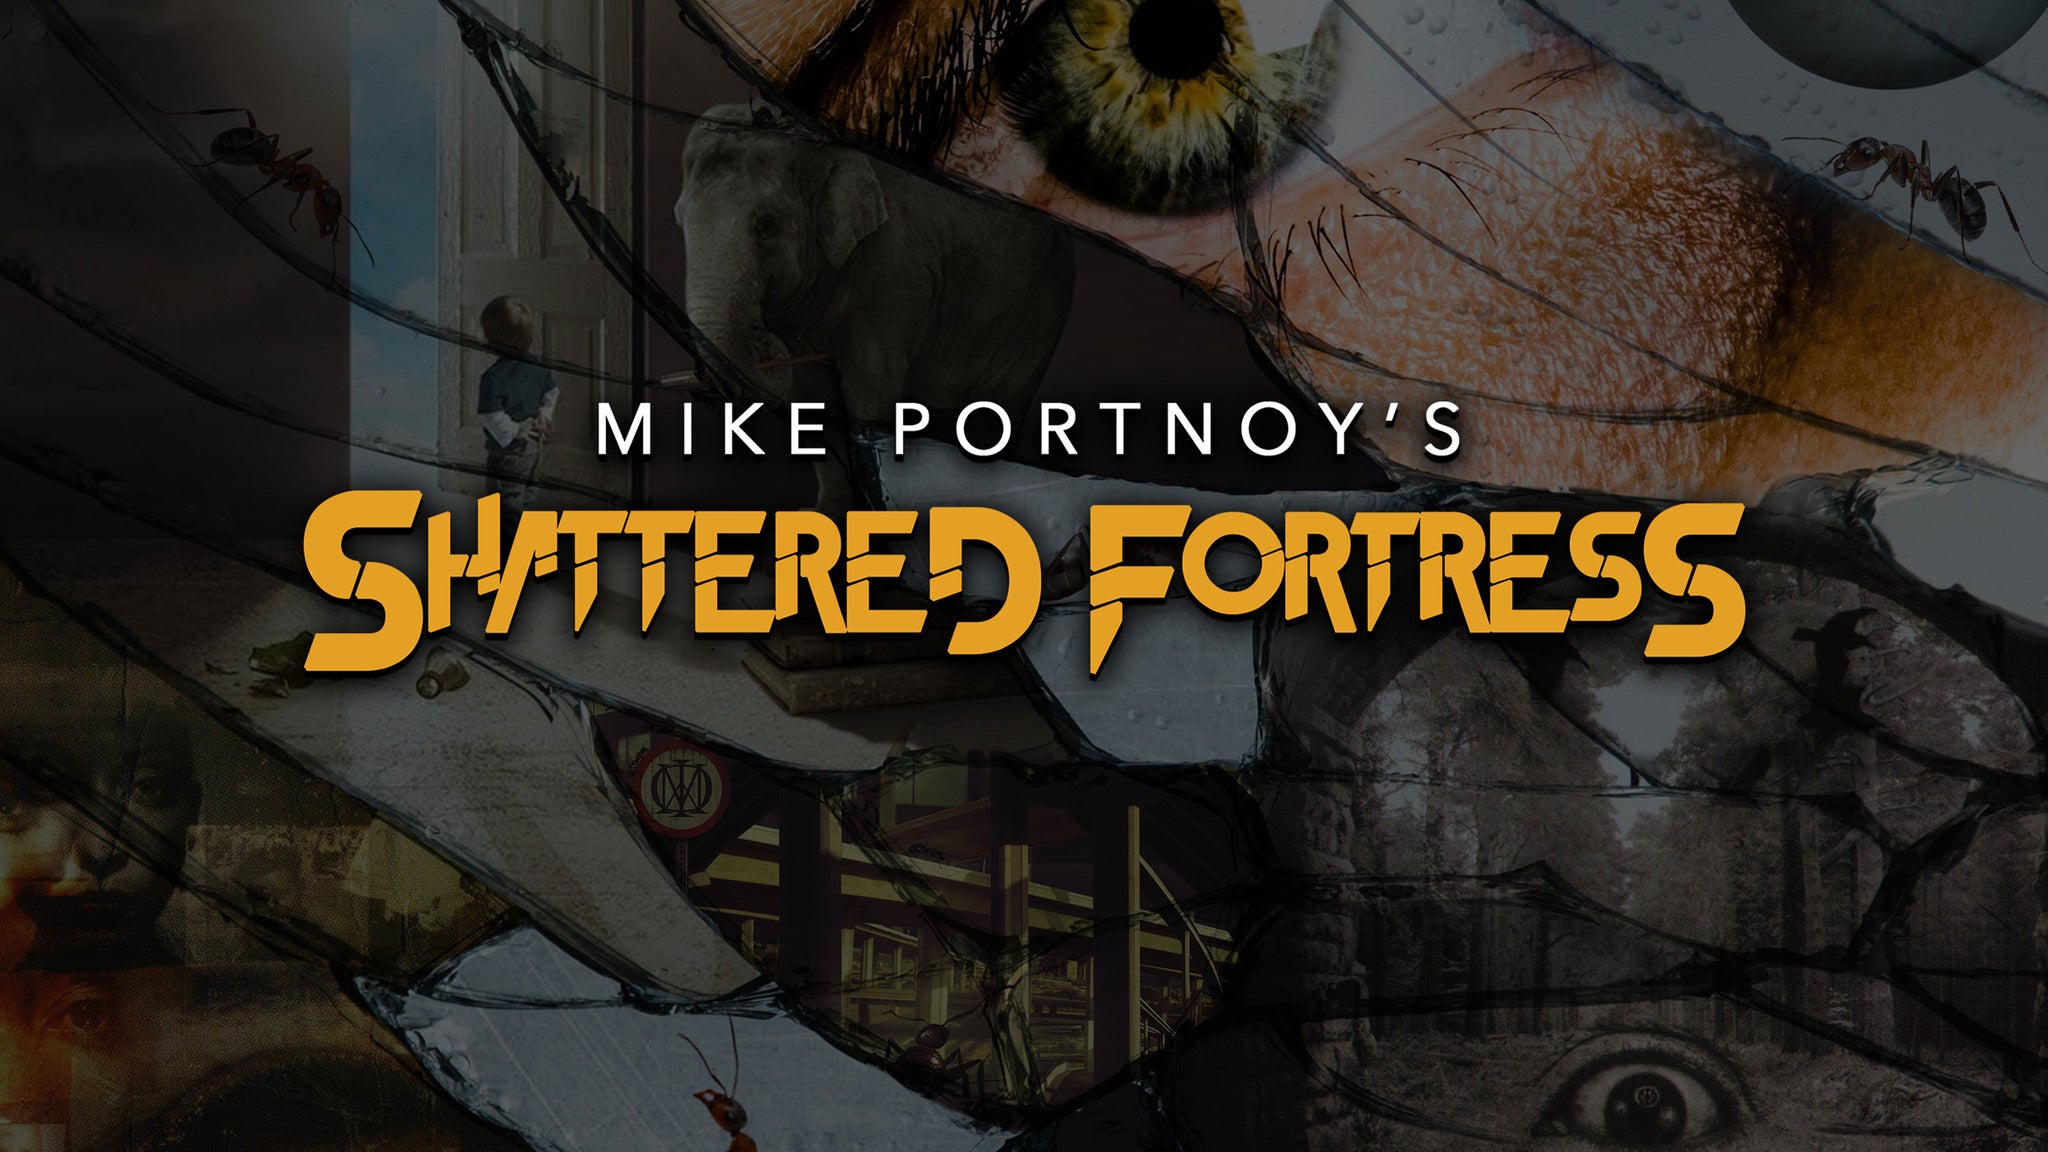 Mike Portnoy's Shattered Fortress playing Dream Theaters 12 Step Suite in New York promo photo for Live Nation presale offer code